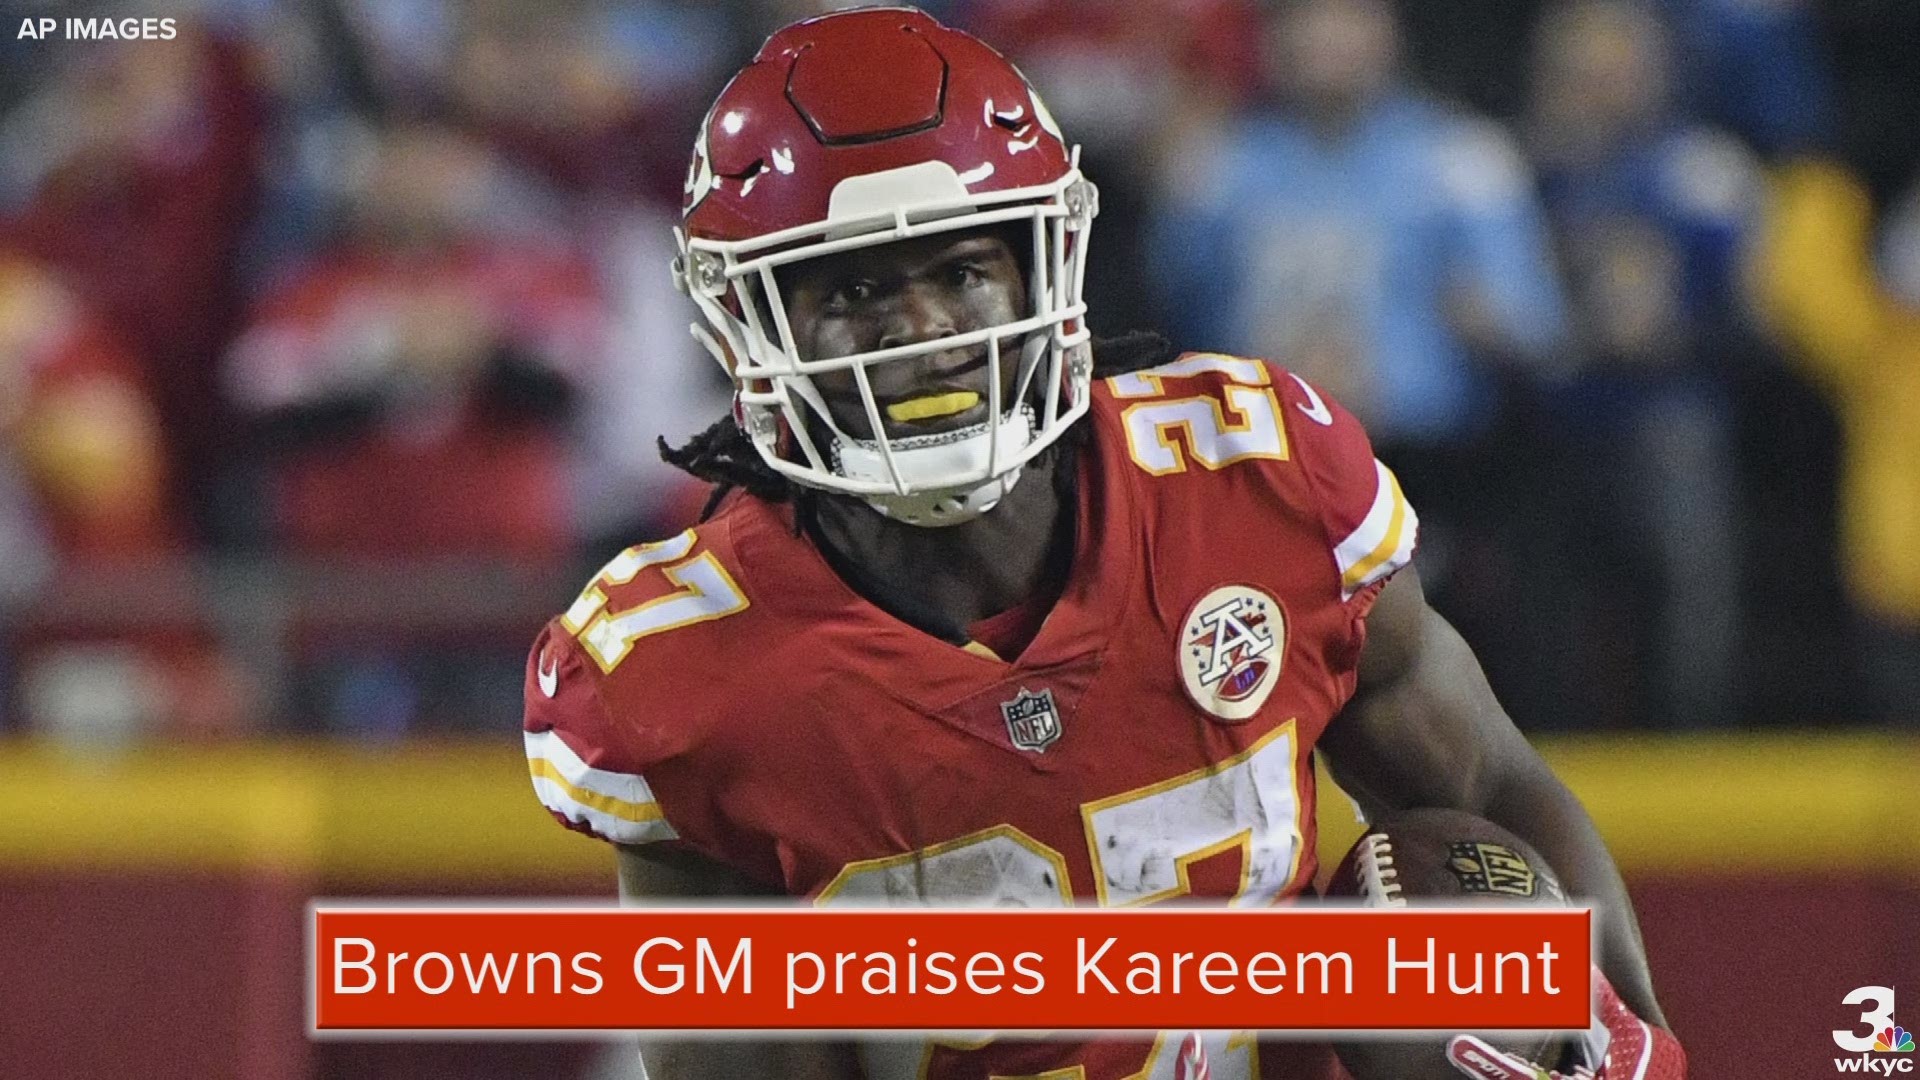 General manager John Dorsey has been impressed by how hard Kareem Hunt is working to represent the Cleveland Browns well, on and off the field.